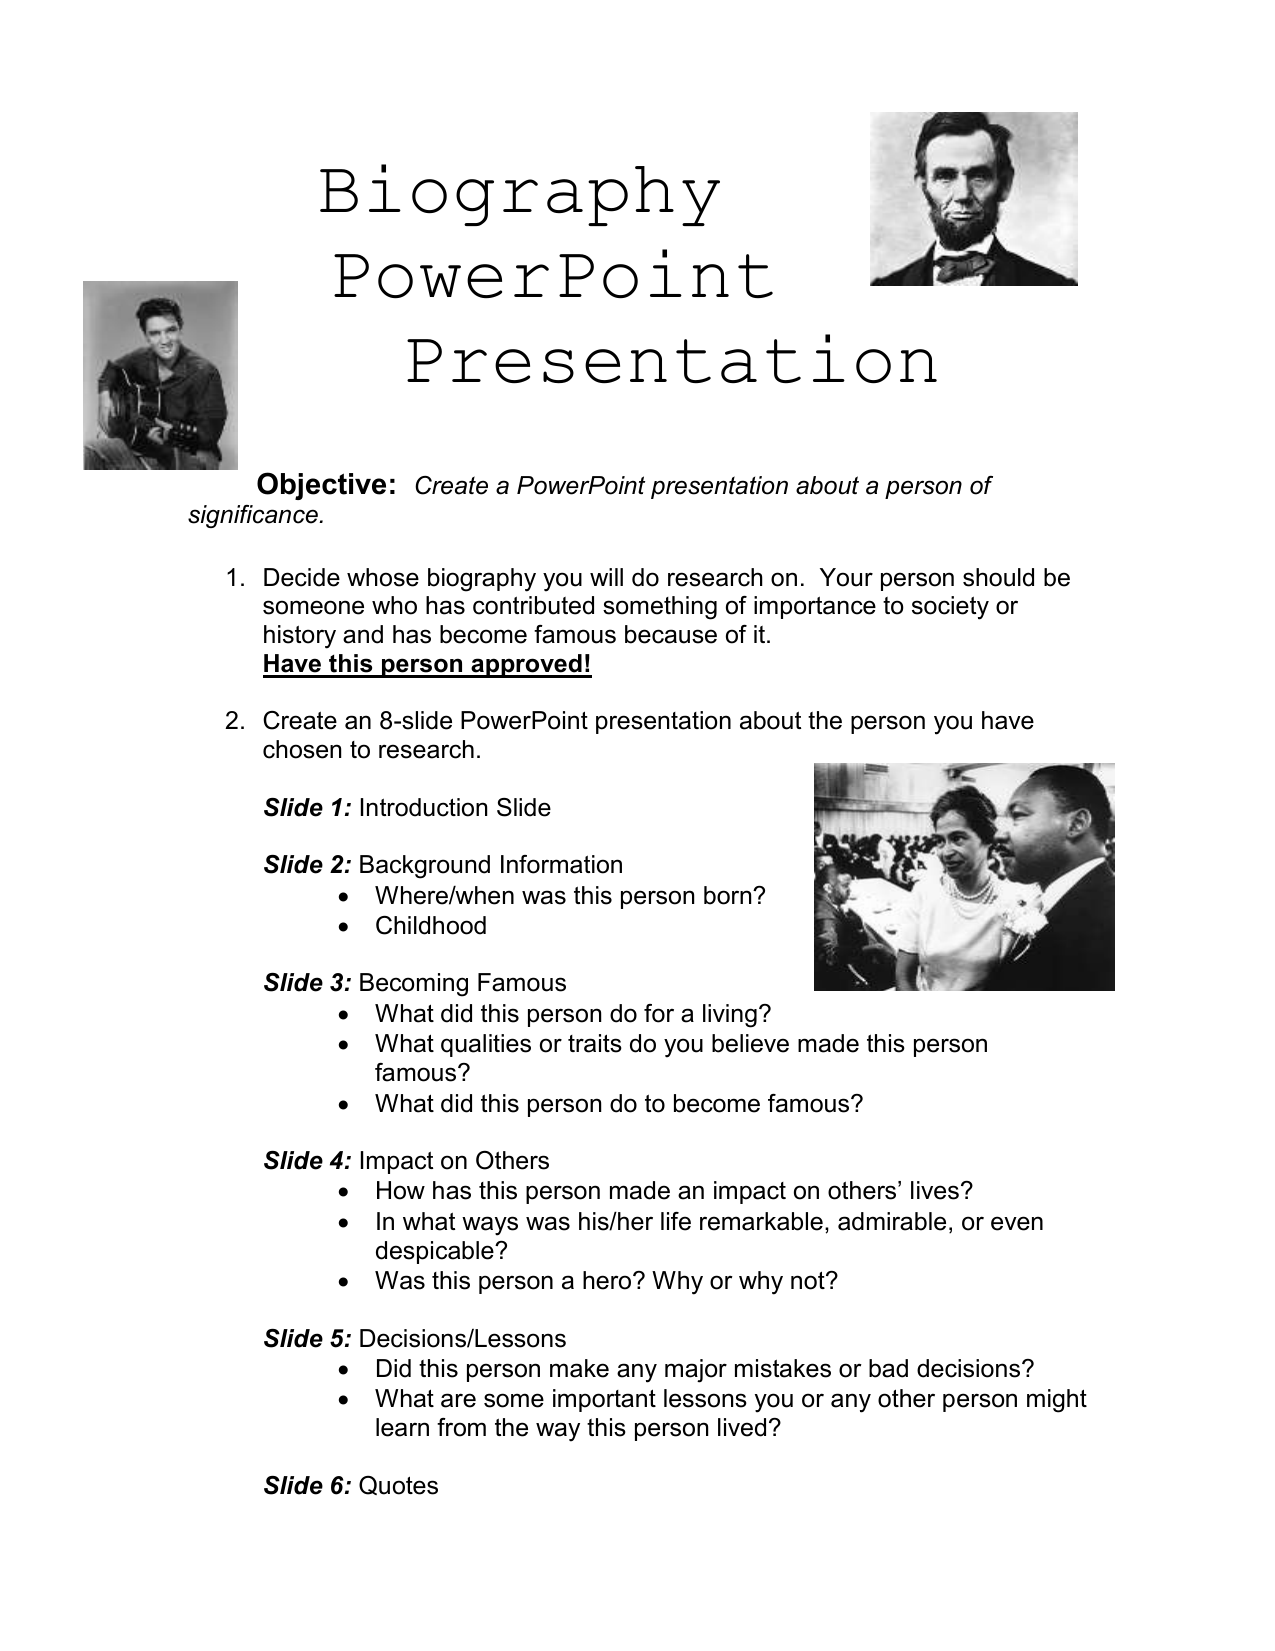 how to make a presentation about a famous person